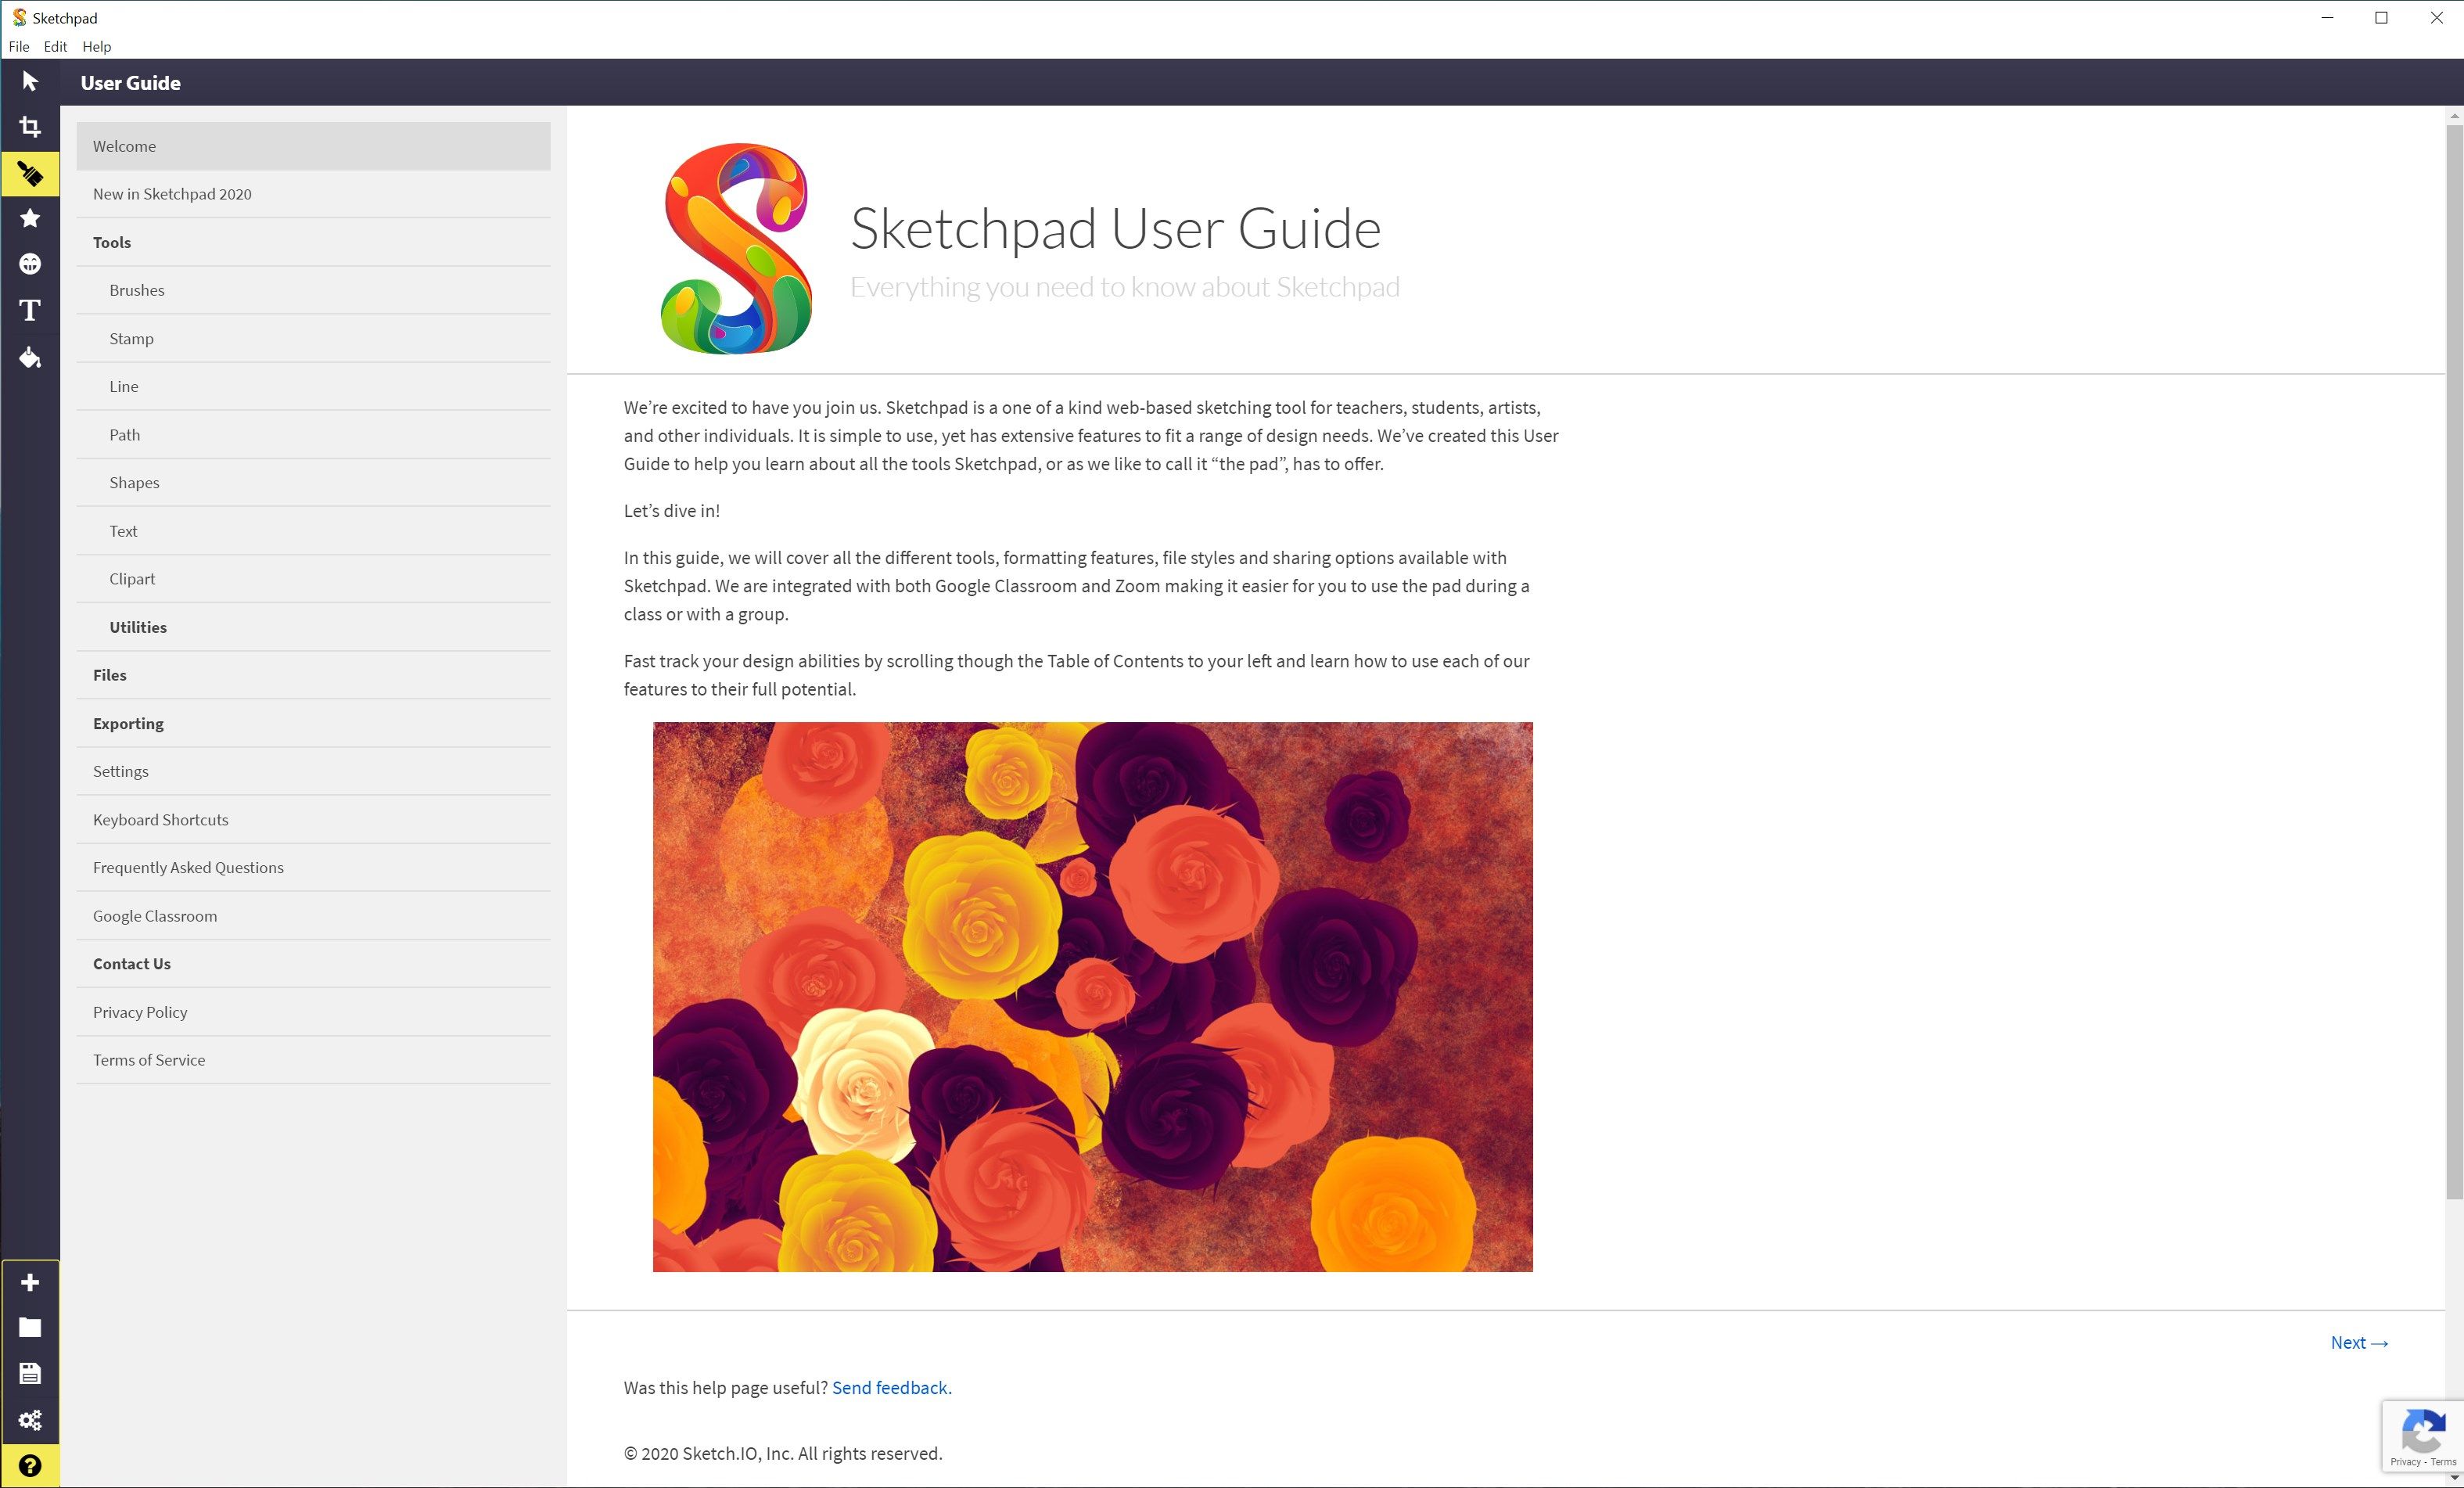 Embedded User Guide to help you get the most out of Sketchpad.